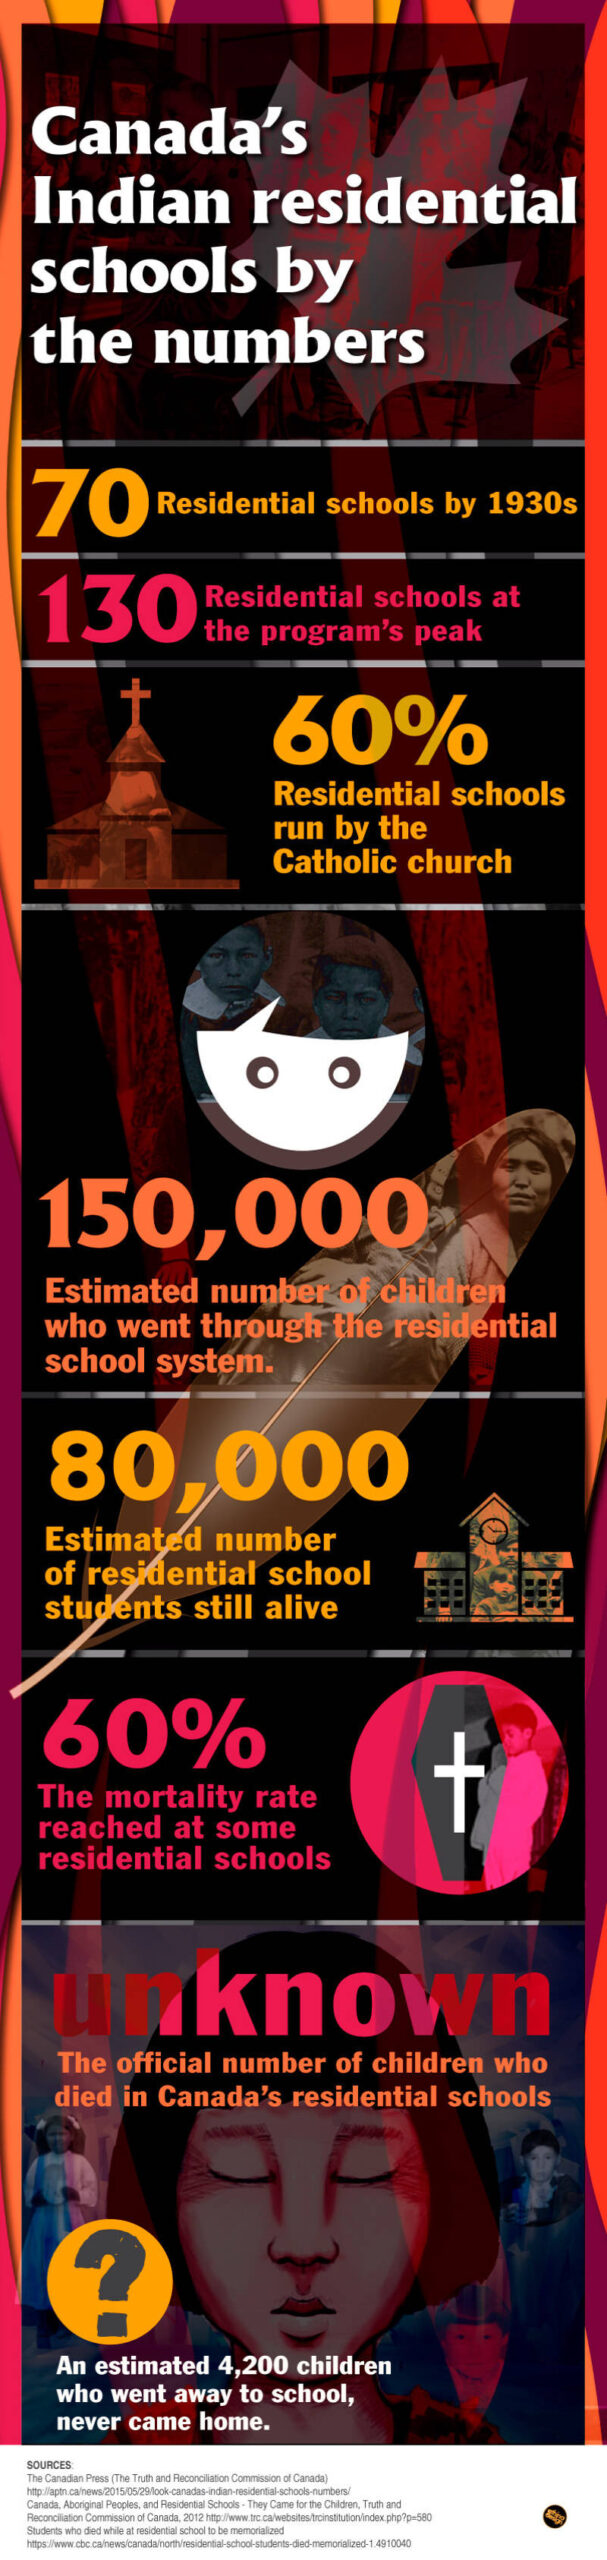 Canada's Indian Residential Schools by the Numbers - Infographic